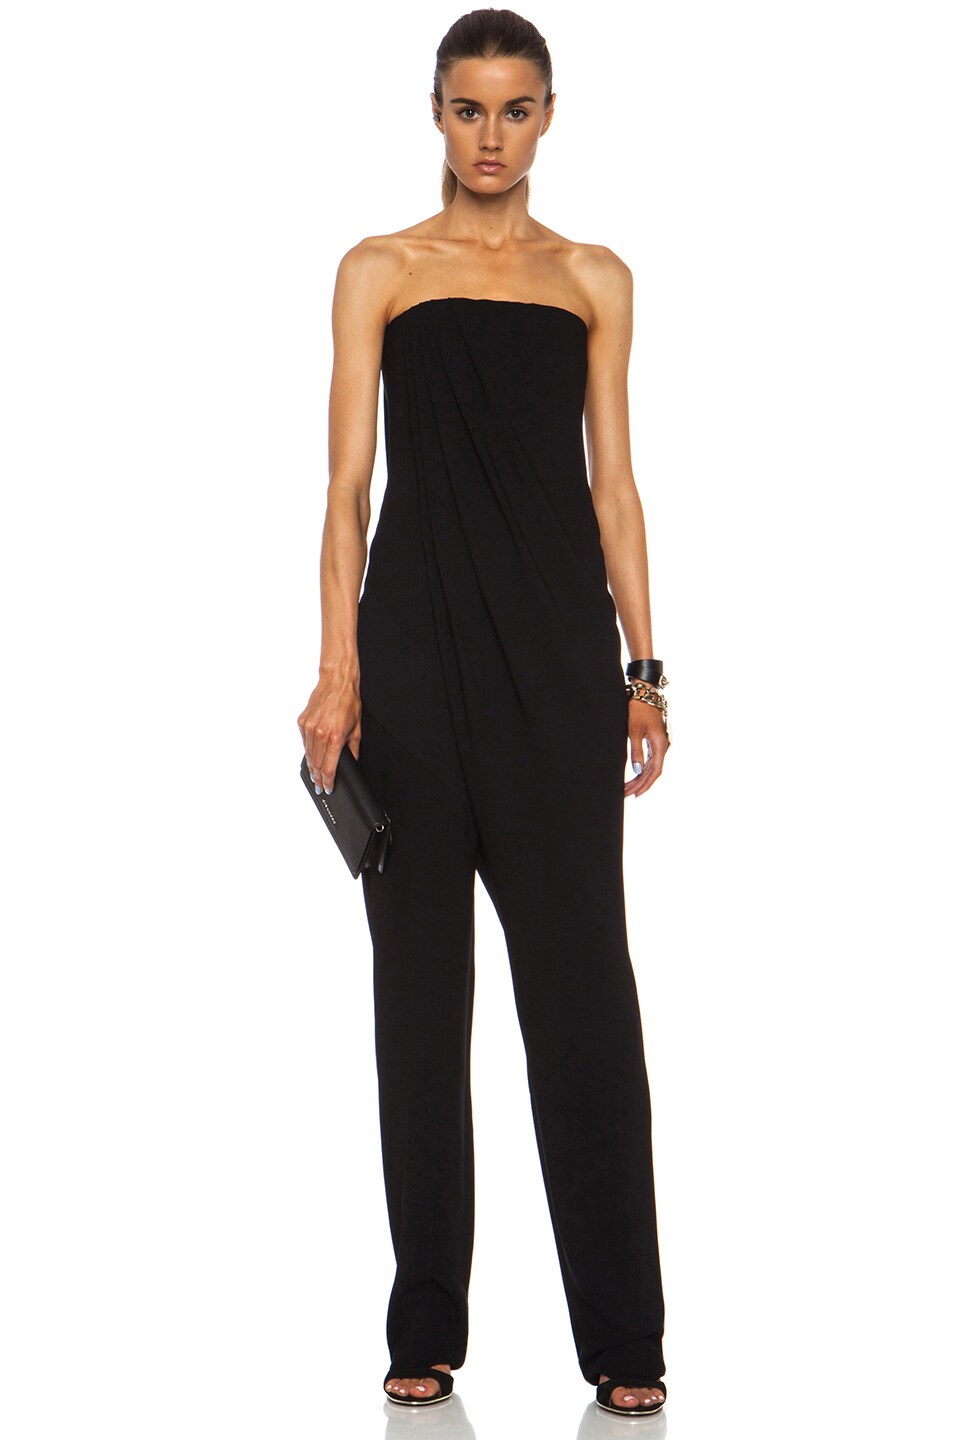 Givenchy Corseted Viscose-Blend Jumpsuit with Pockets in Black | FWRD